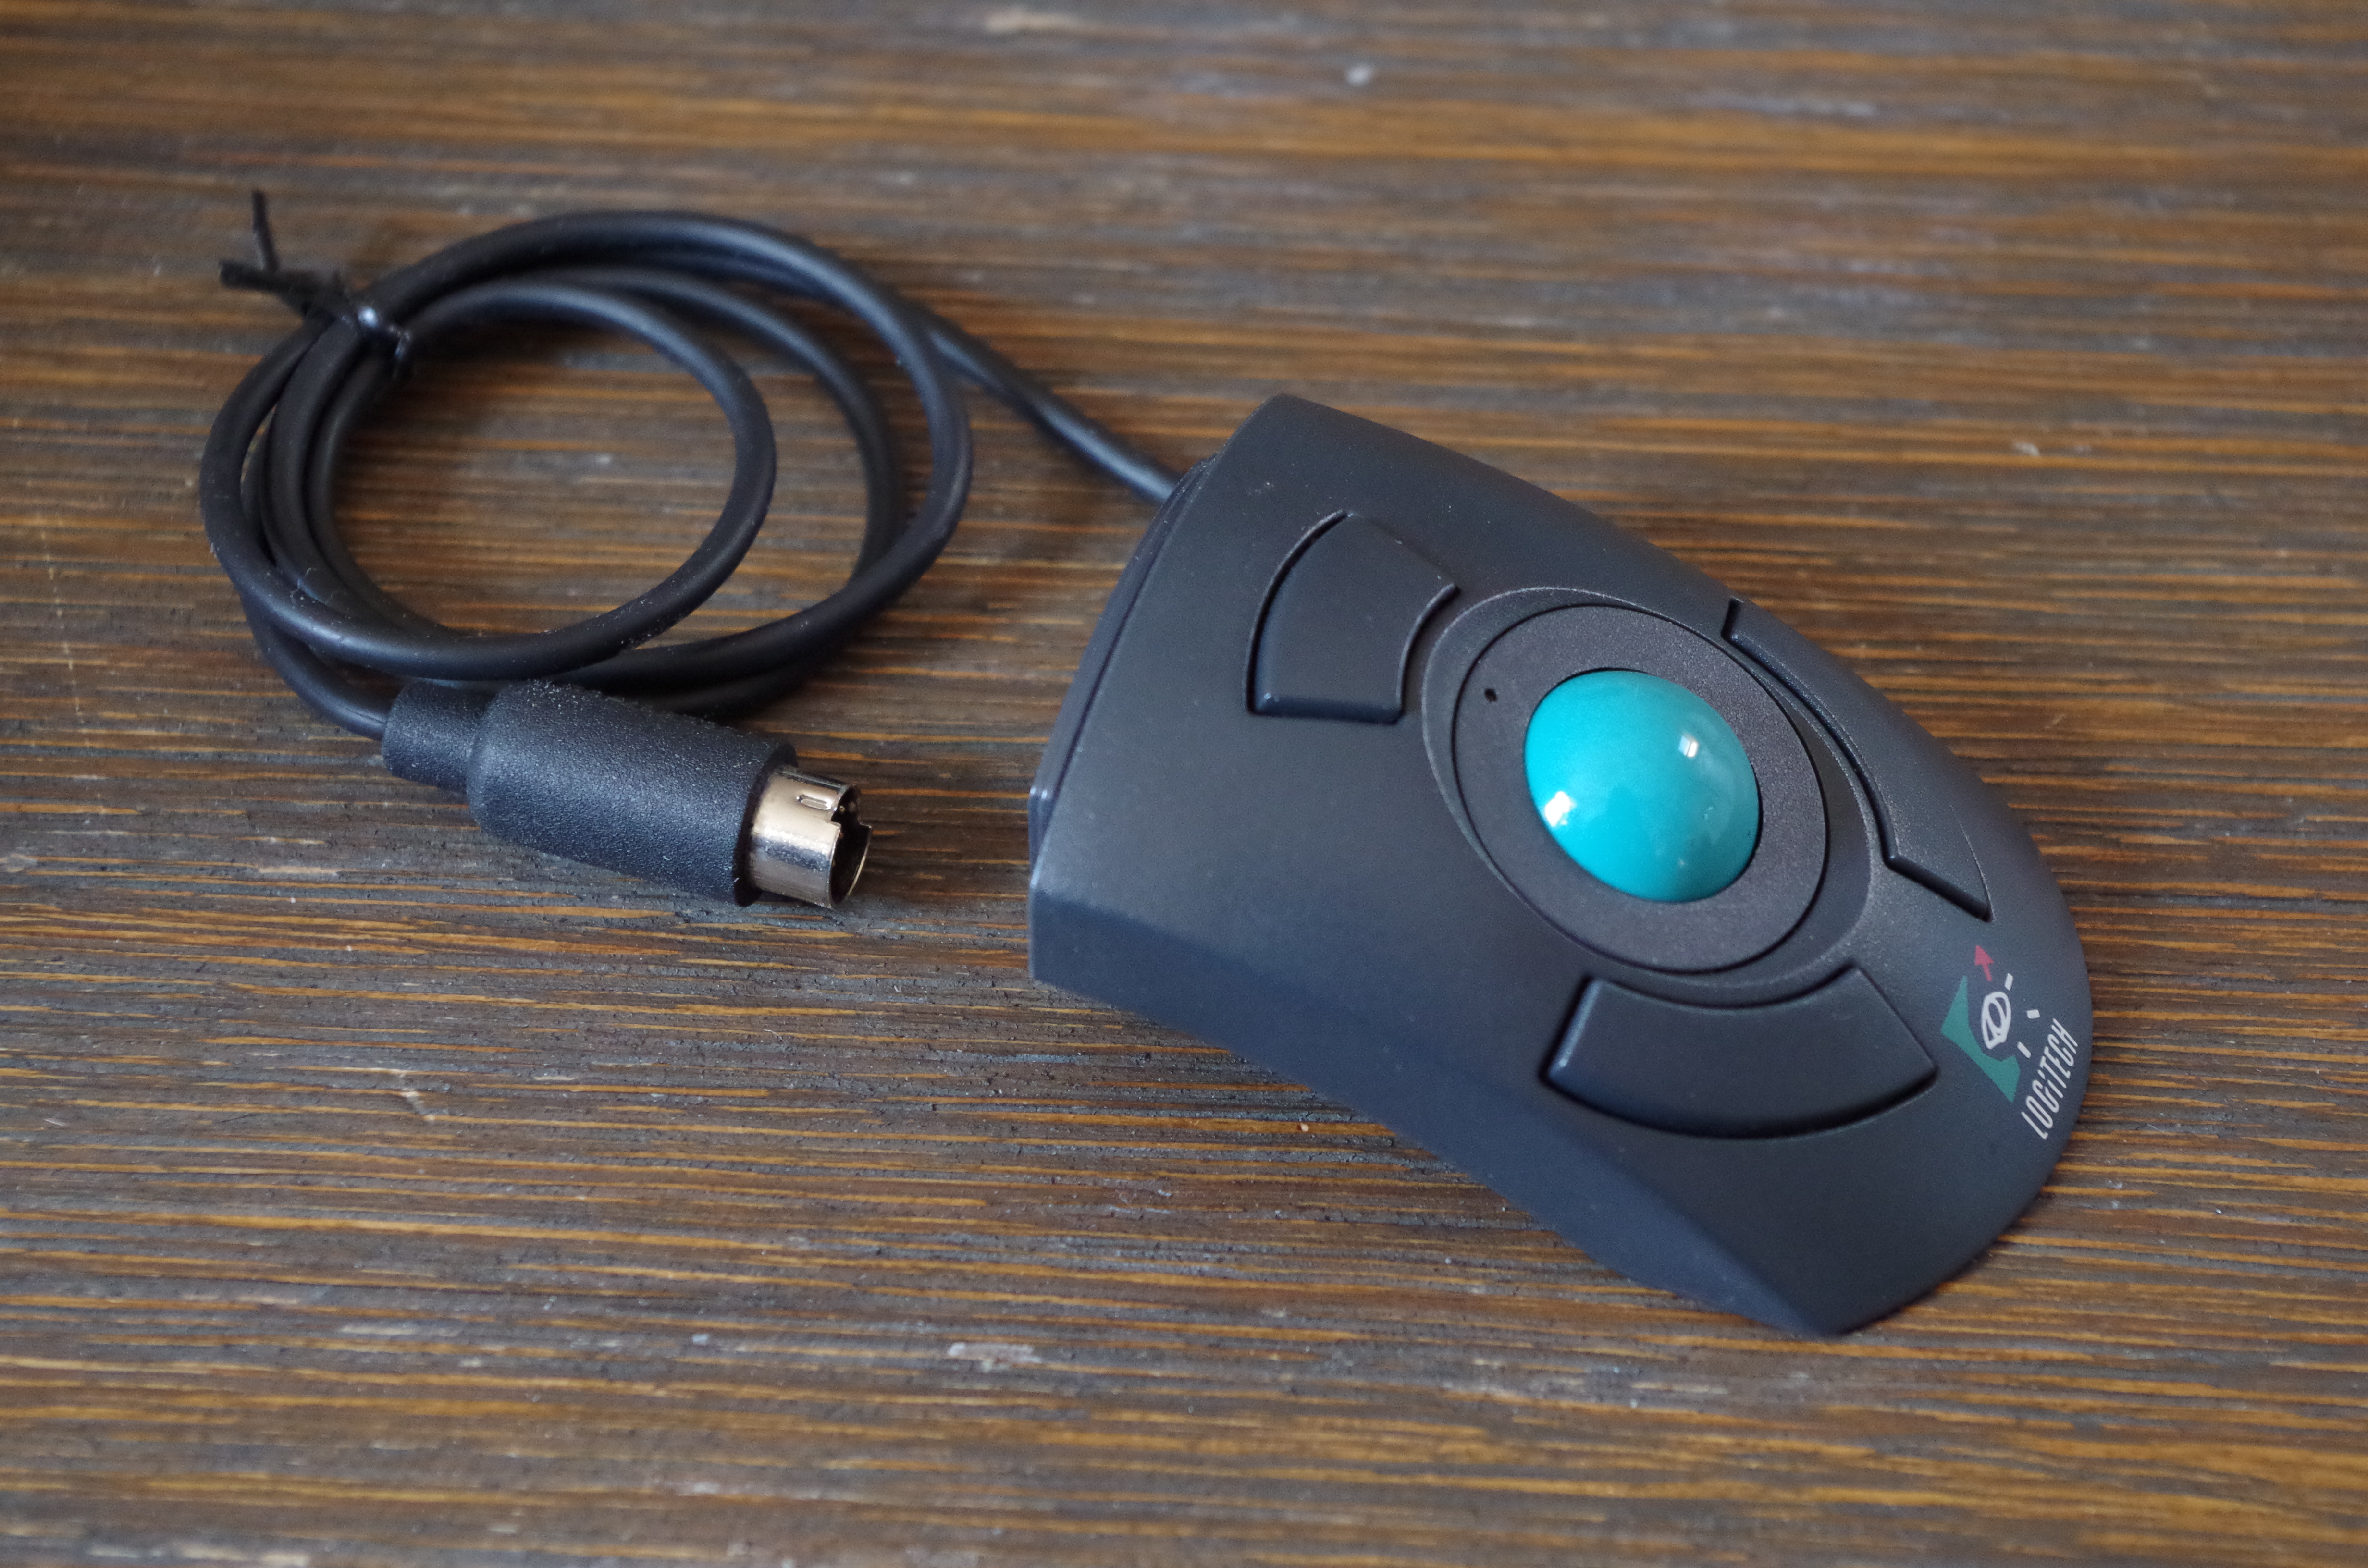 In a blast from the past, Logitech releases a new trackball